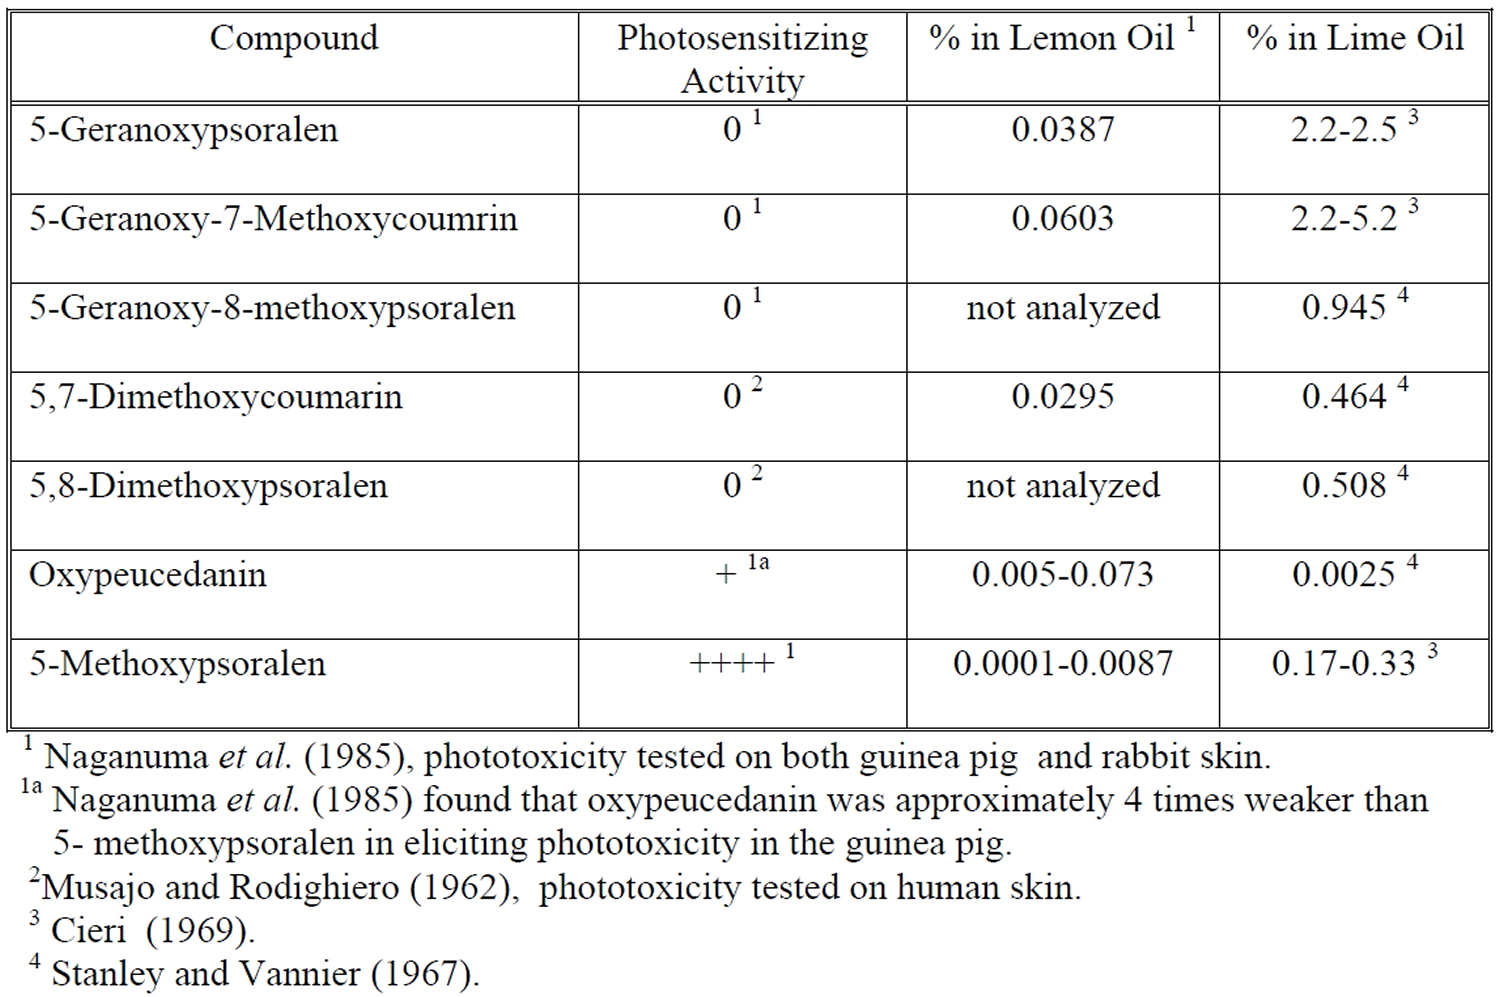 Levels of Major Coumarins and Furocoumarins in Lime Oil